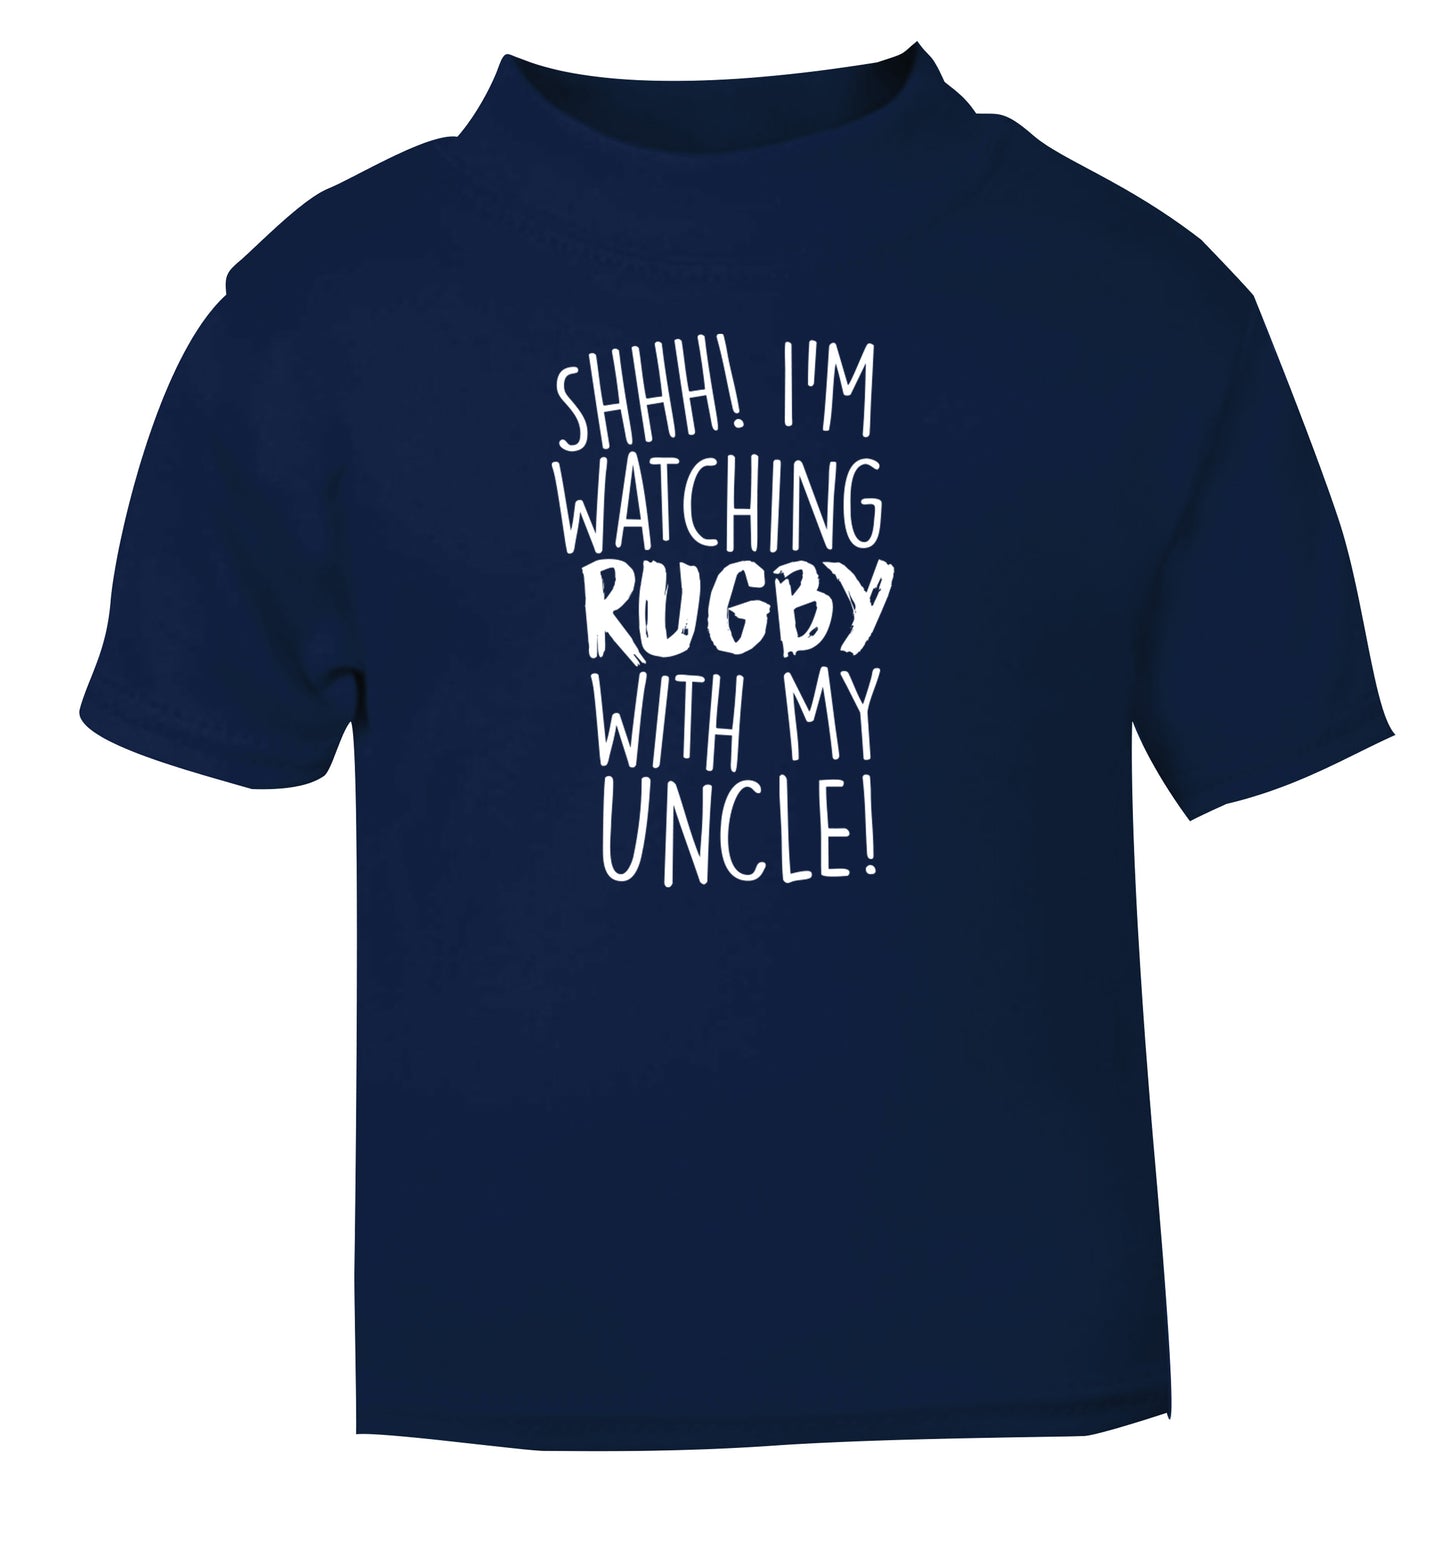 Shh.. I'm watching rugby with my uncle navy Baby Toddler Tshirt 2 Years